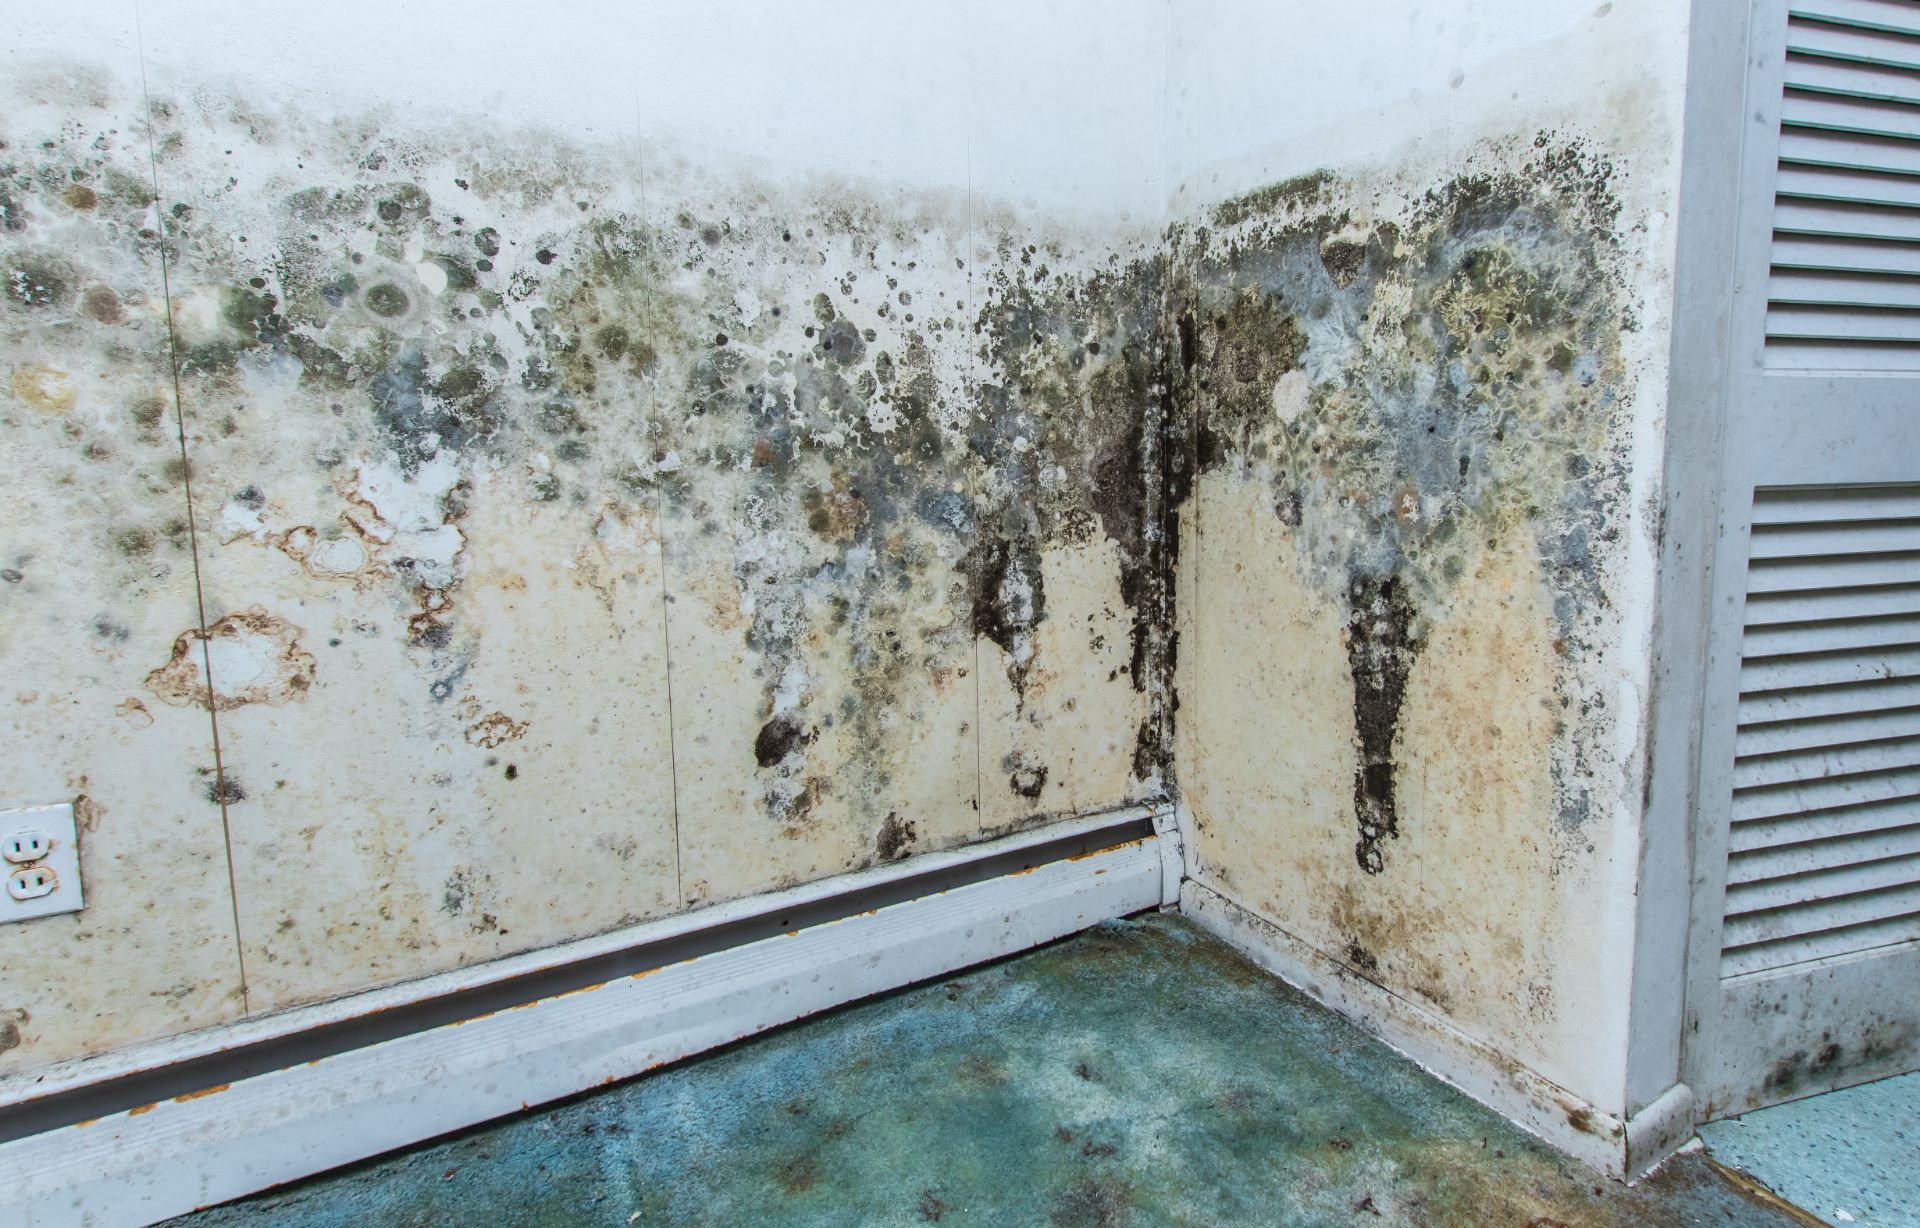 Room infested with black mold